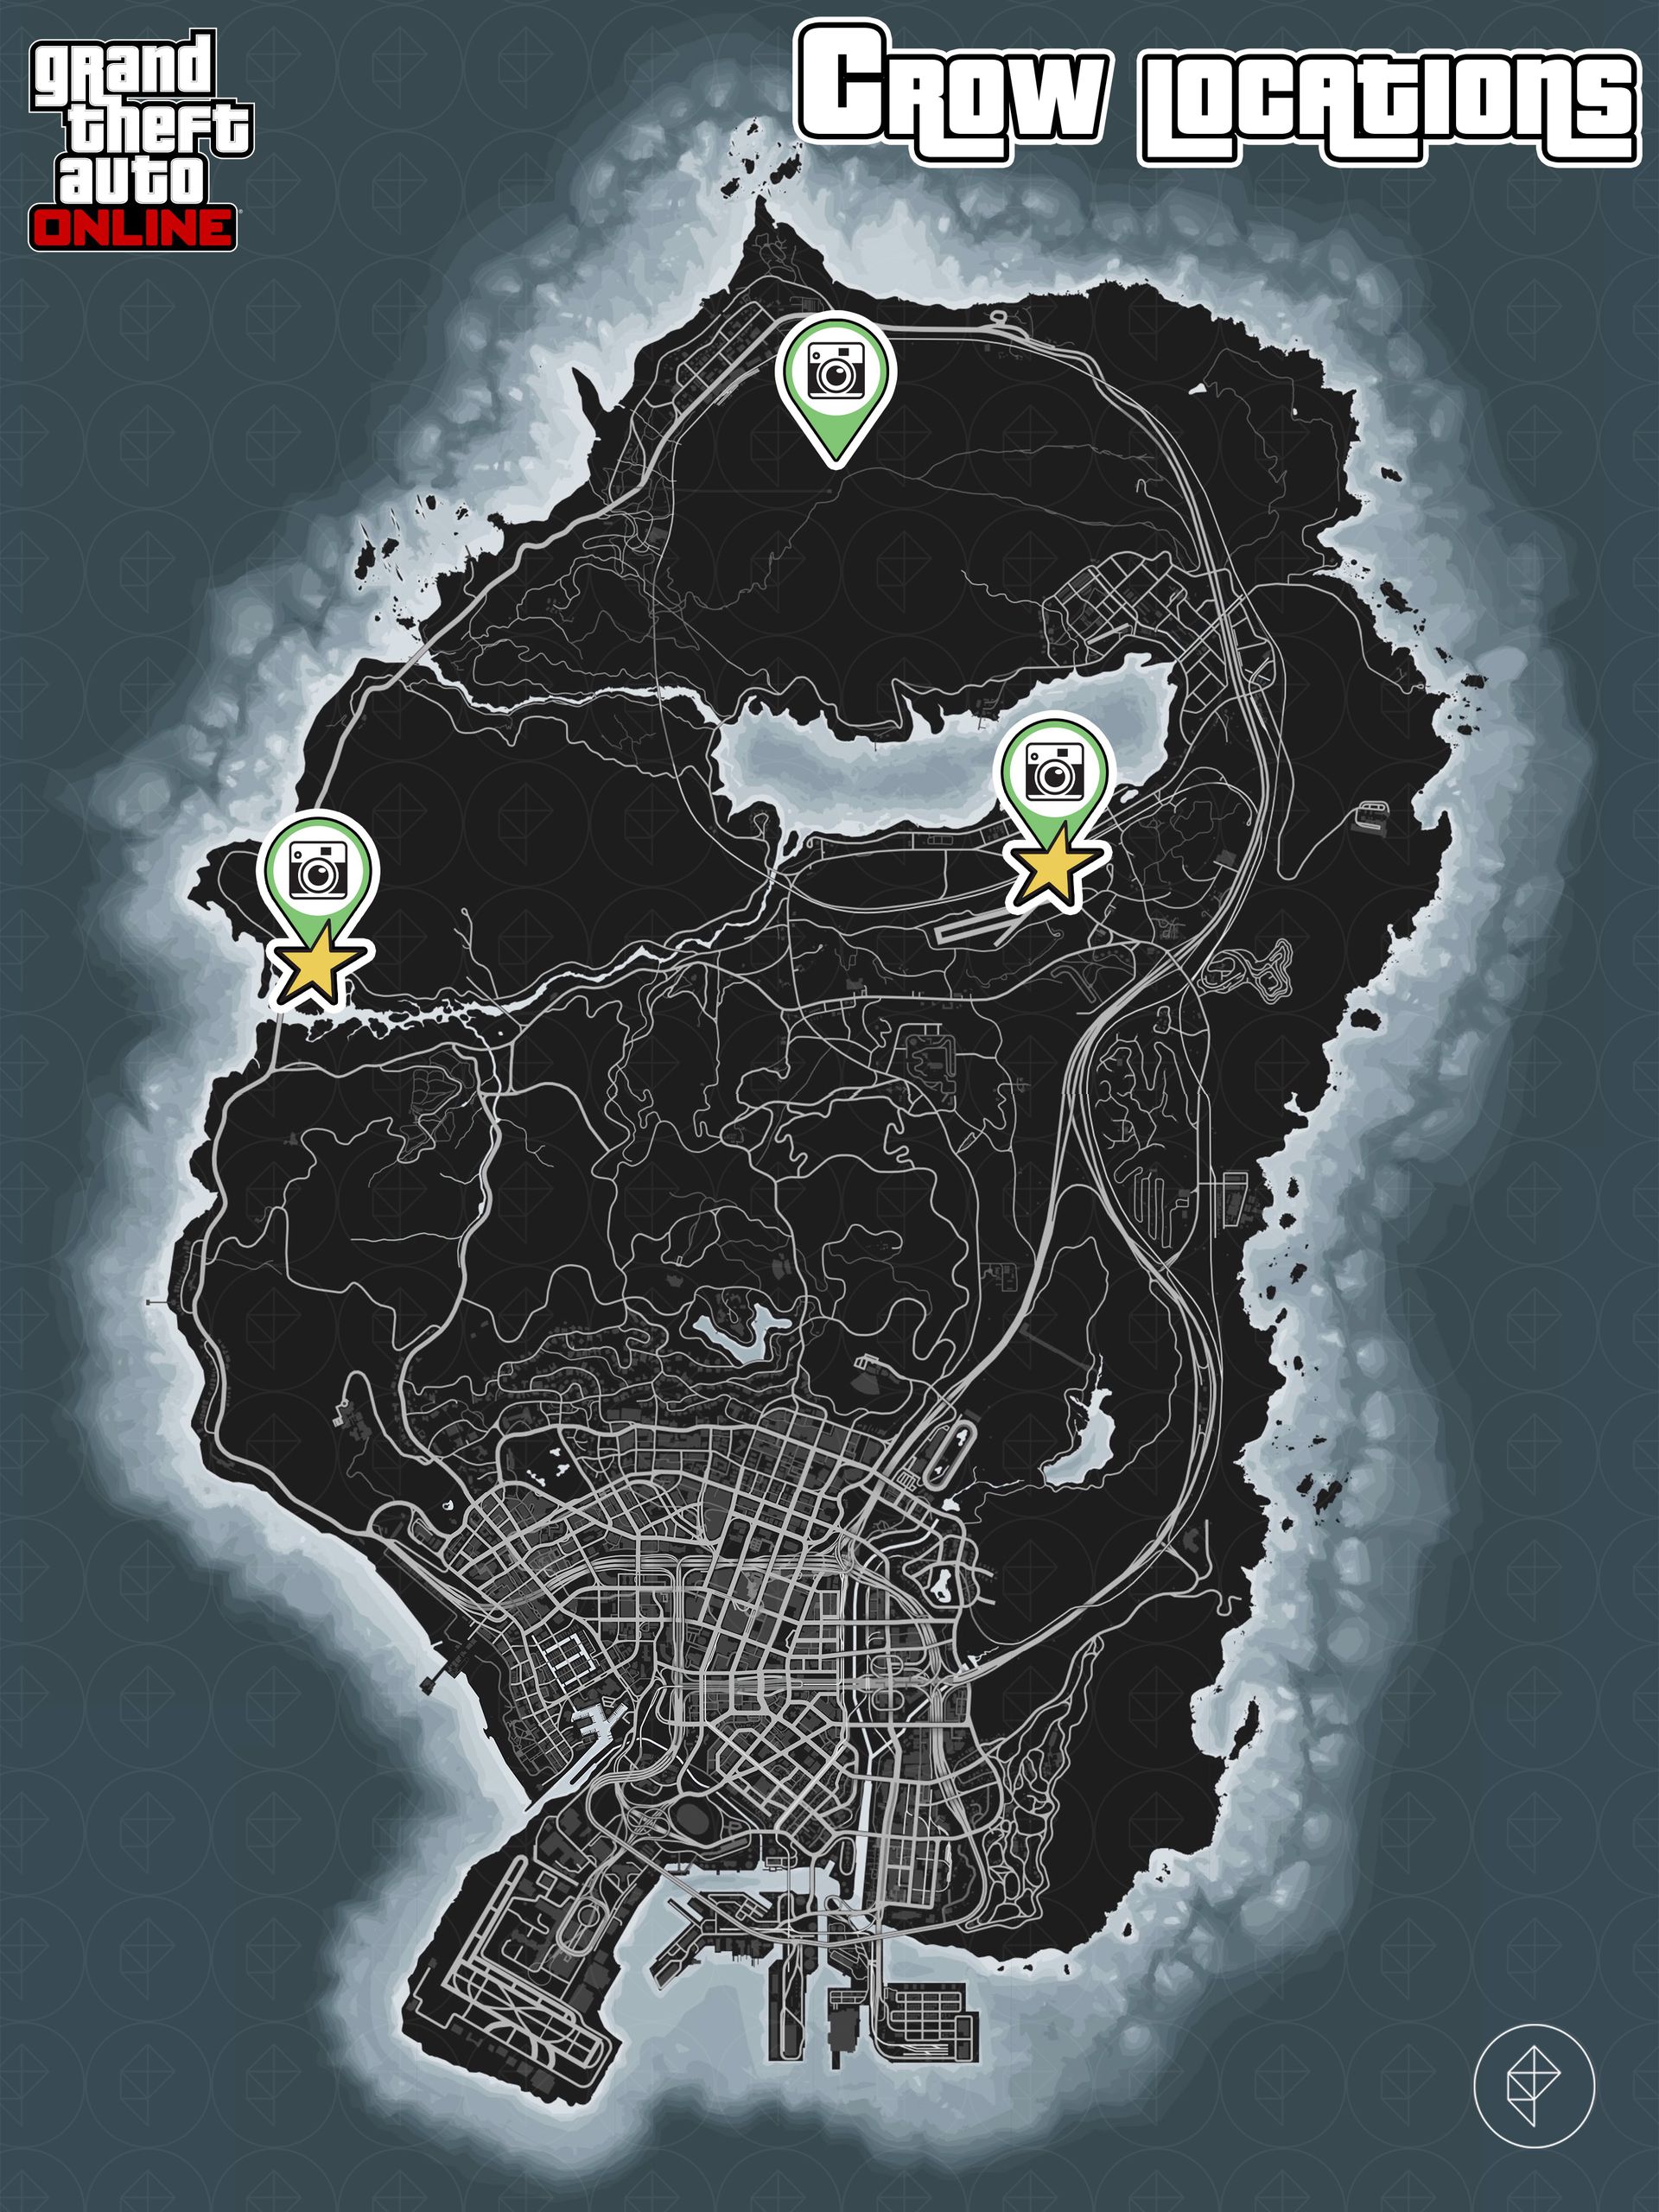 GTA Online map showing crow locations